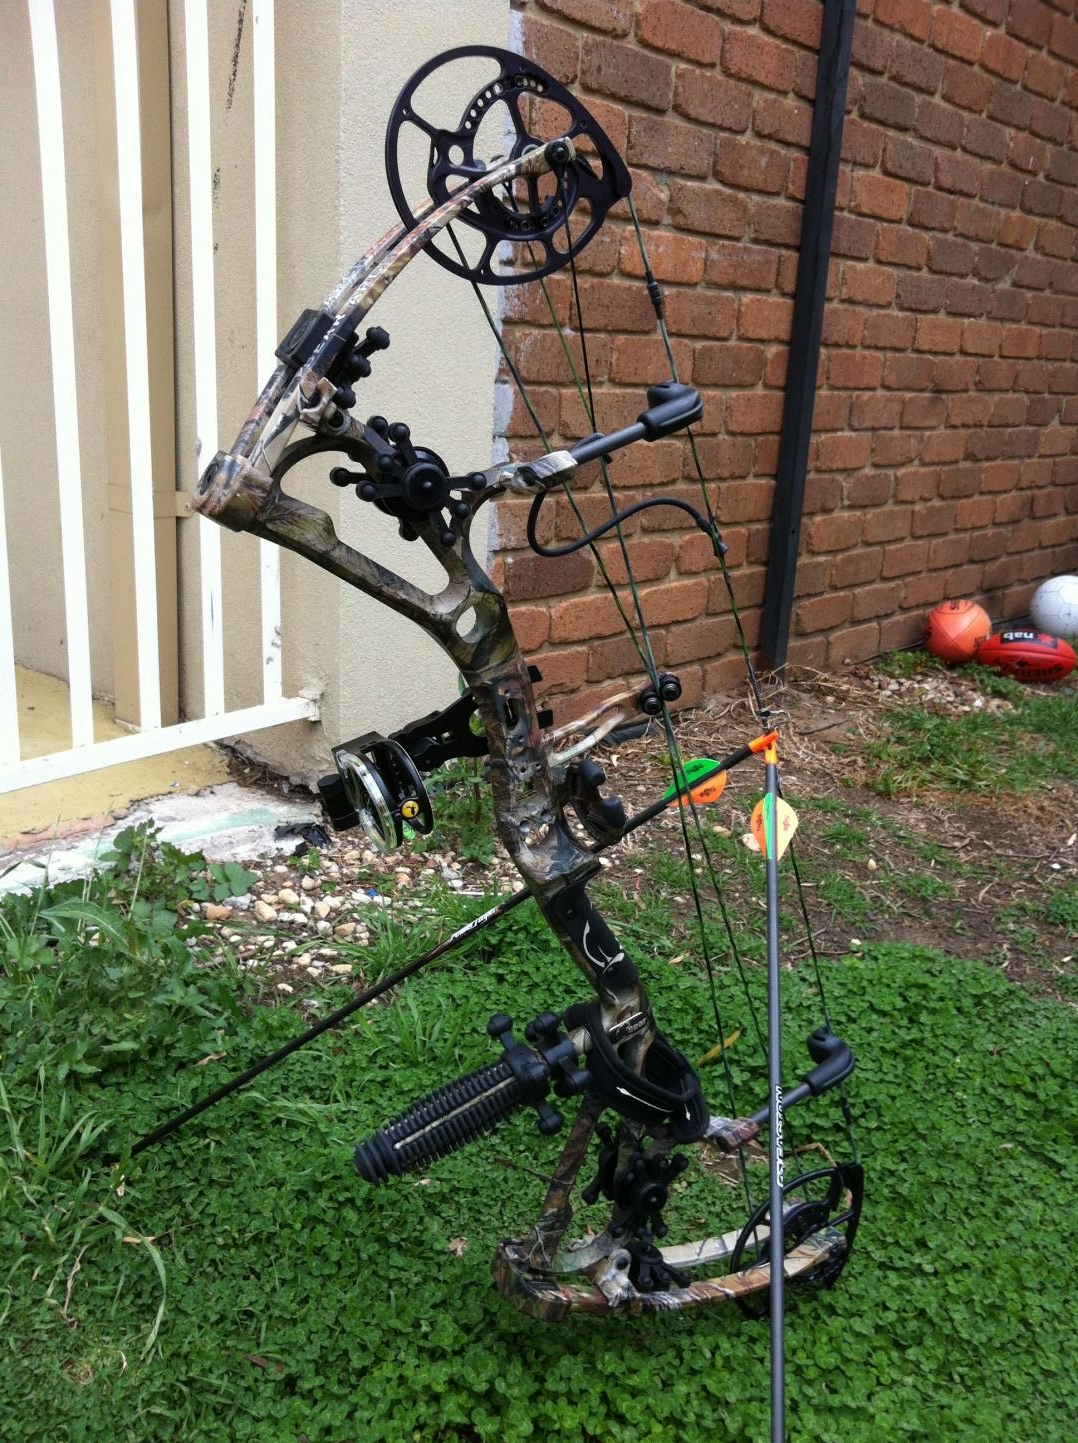 Dating Bear Compound Bows